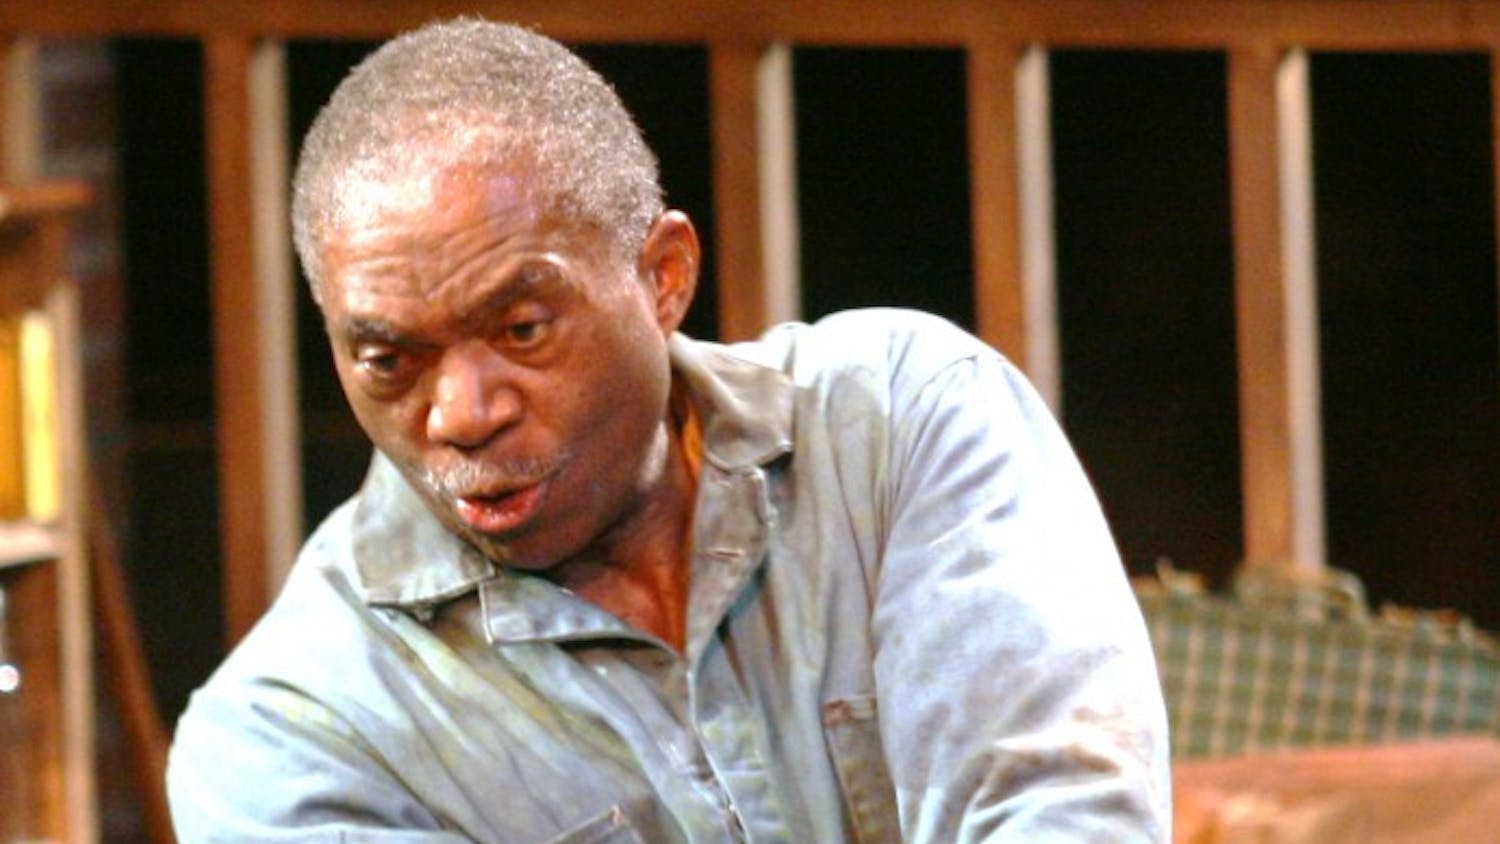 Charlie Robinson stars as Troy, a garbage man, in the play Fences at Paul Green Theatre. The play runs through November 14th.